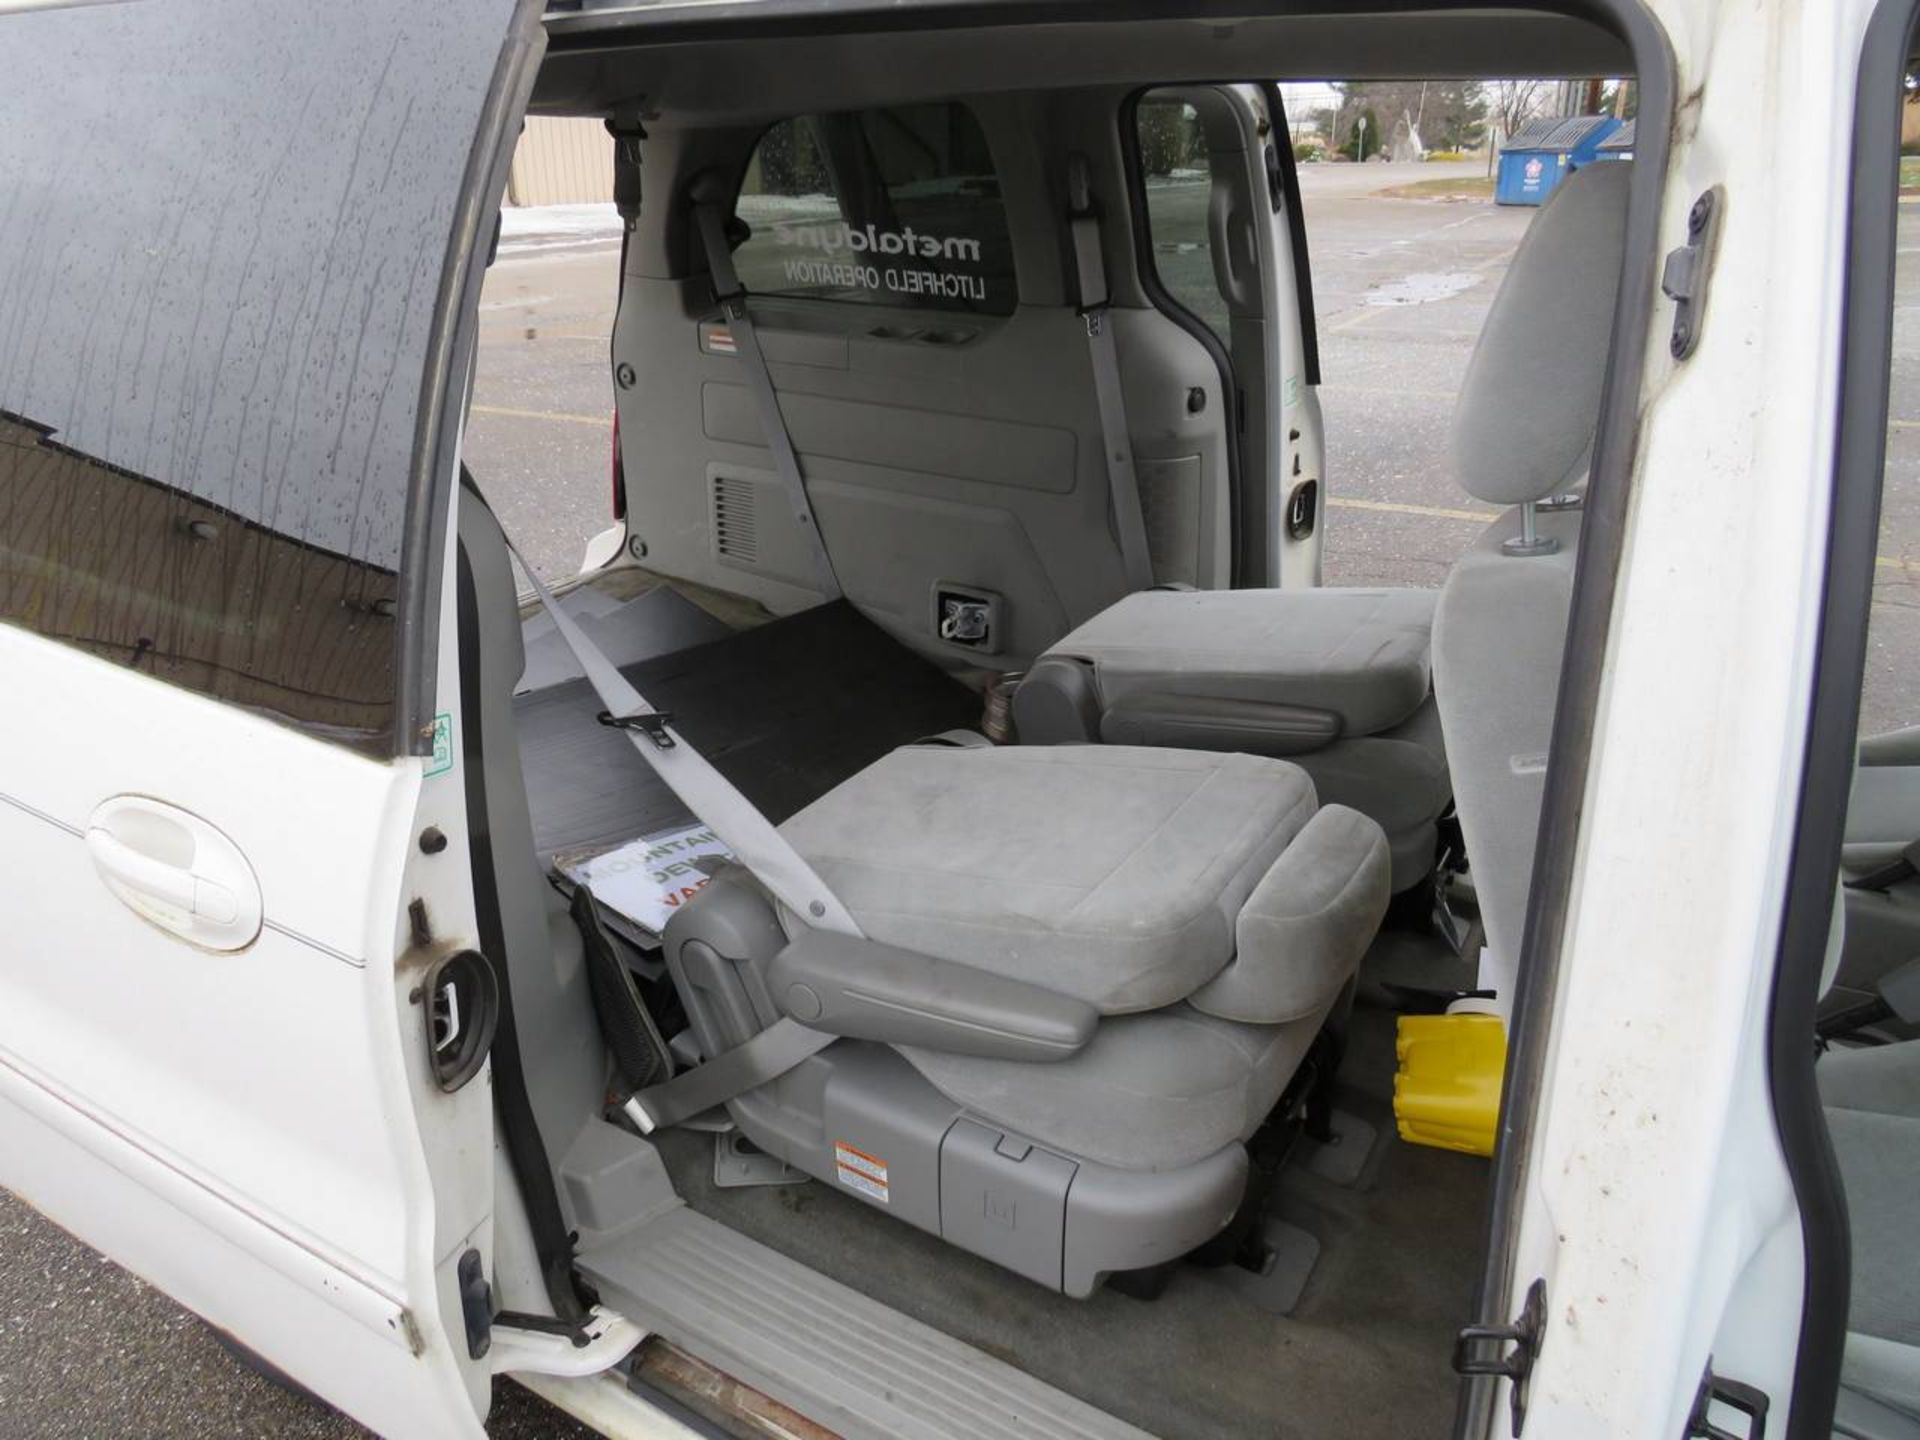 2005 Ford Freestyle Van - Image 17 of 23